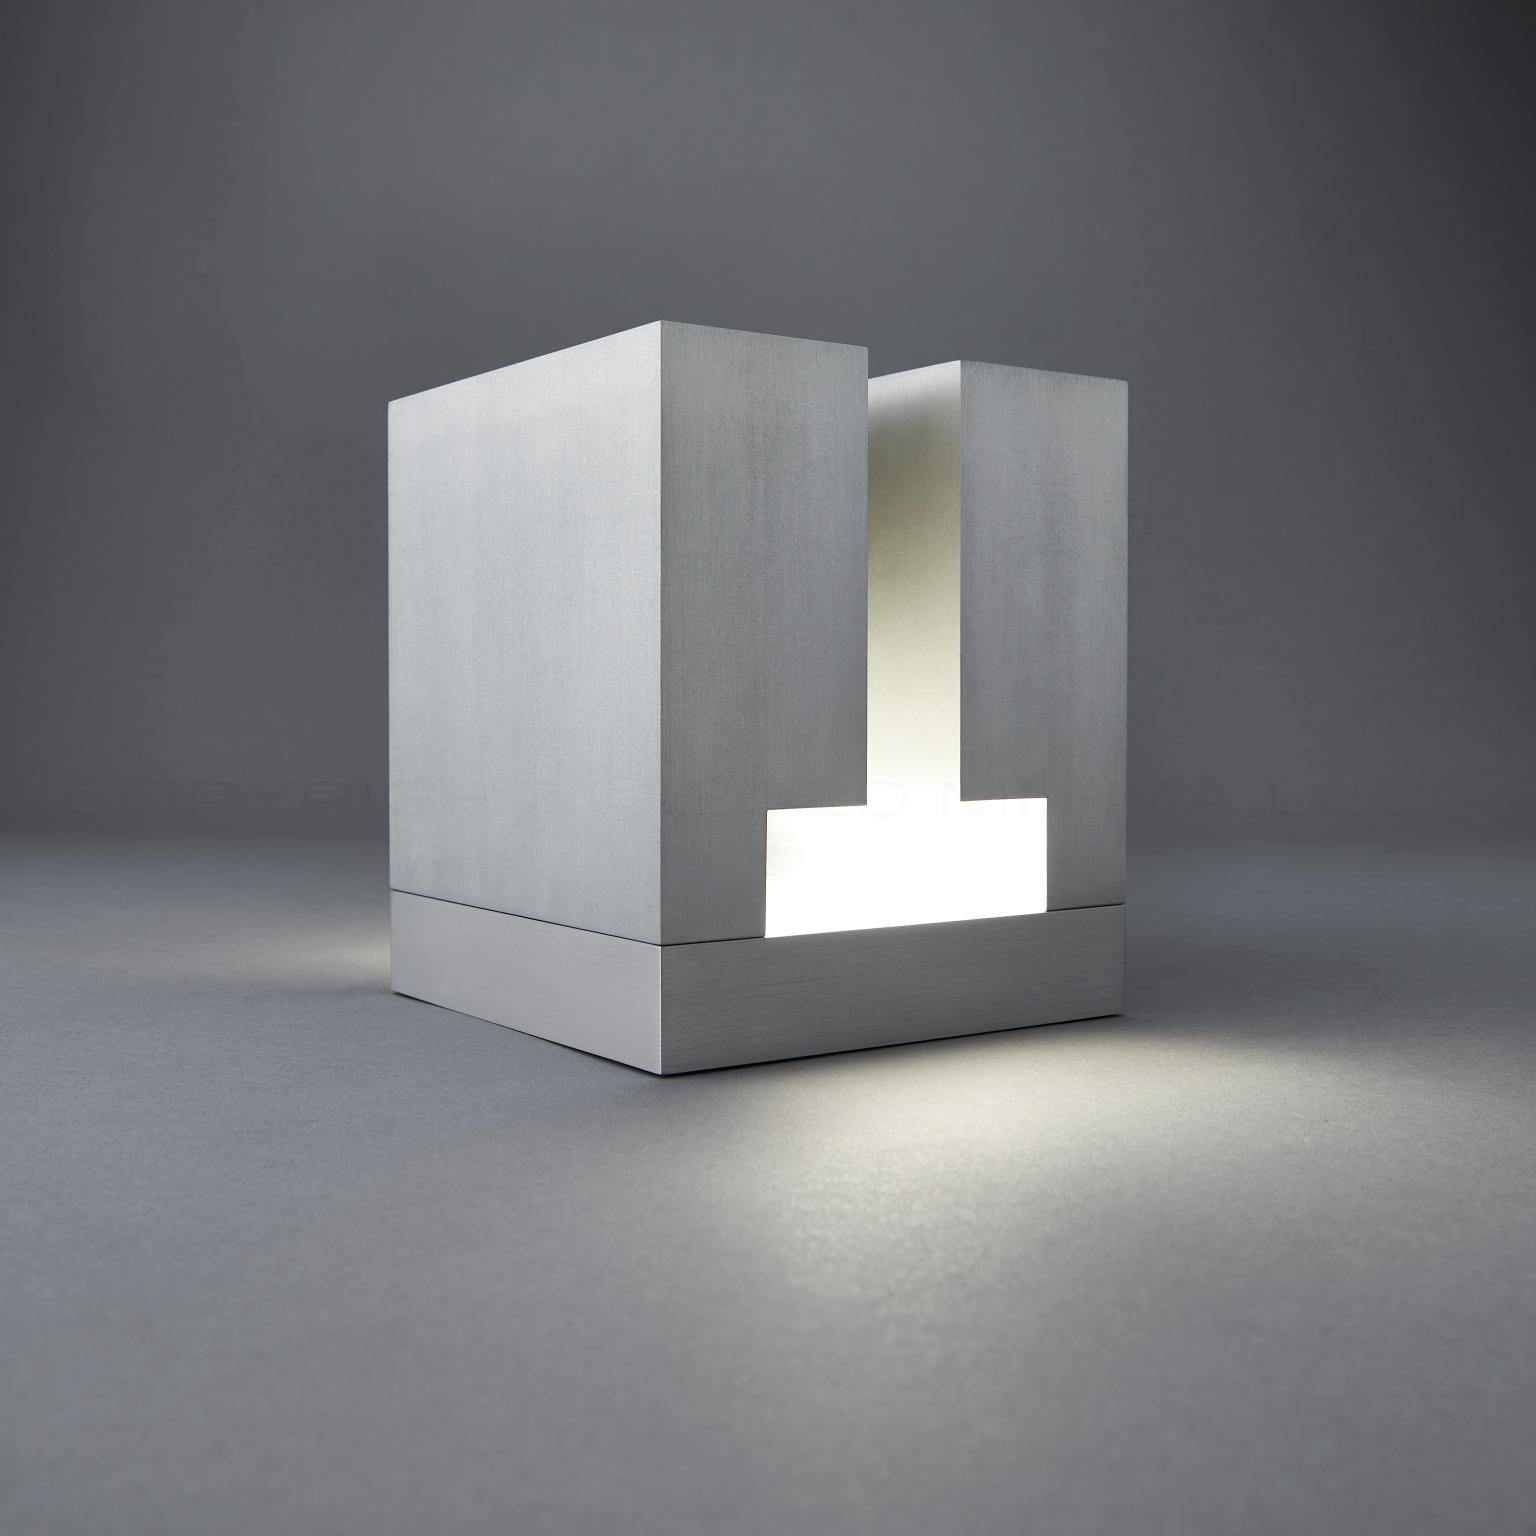 Onera2 by mnima. Table light sculpted from solid aluminum. Modern. Minimal.

Physical
Material 6061 aluminum
Finish clear anodize shown
Weight 9.1lb

Electrical
Input 90-264Vac 50-60Hz
Output 7.5Vdc 0.366A 2.75W
Dimming high-low